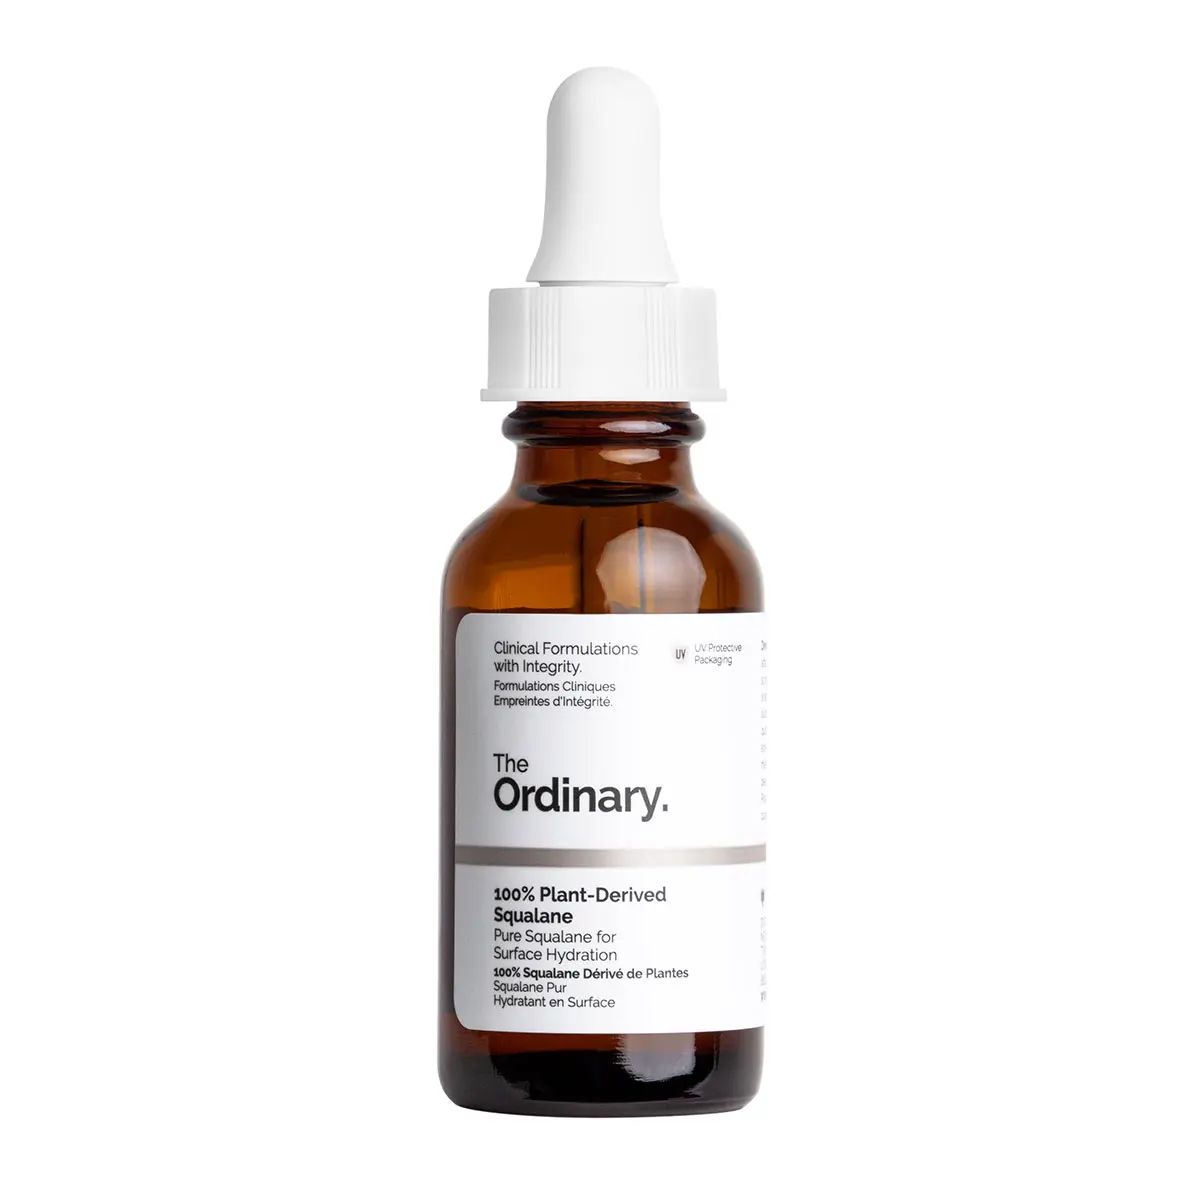 The Ordinary 100% Plant-Derived Squalane 30ml Discounts and Cashback